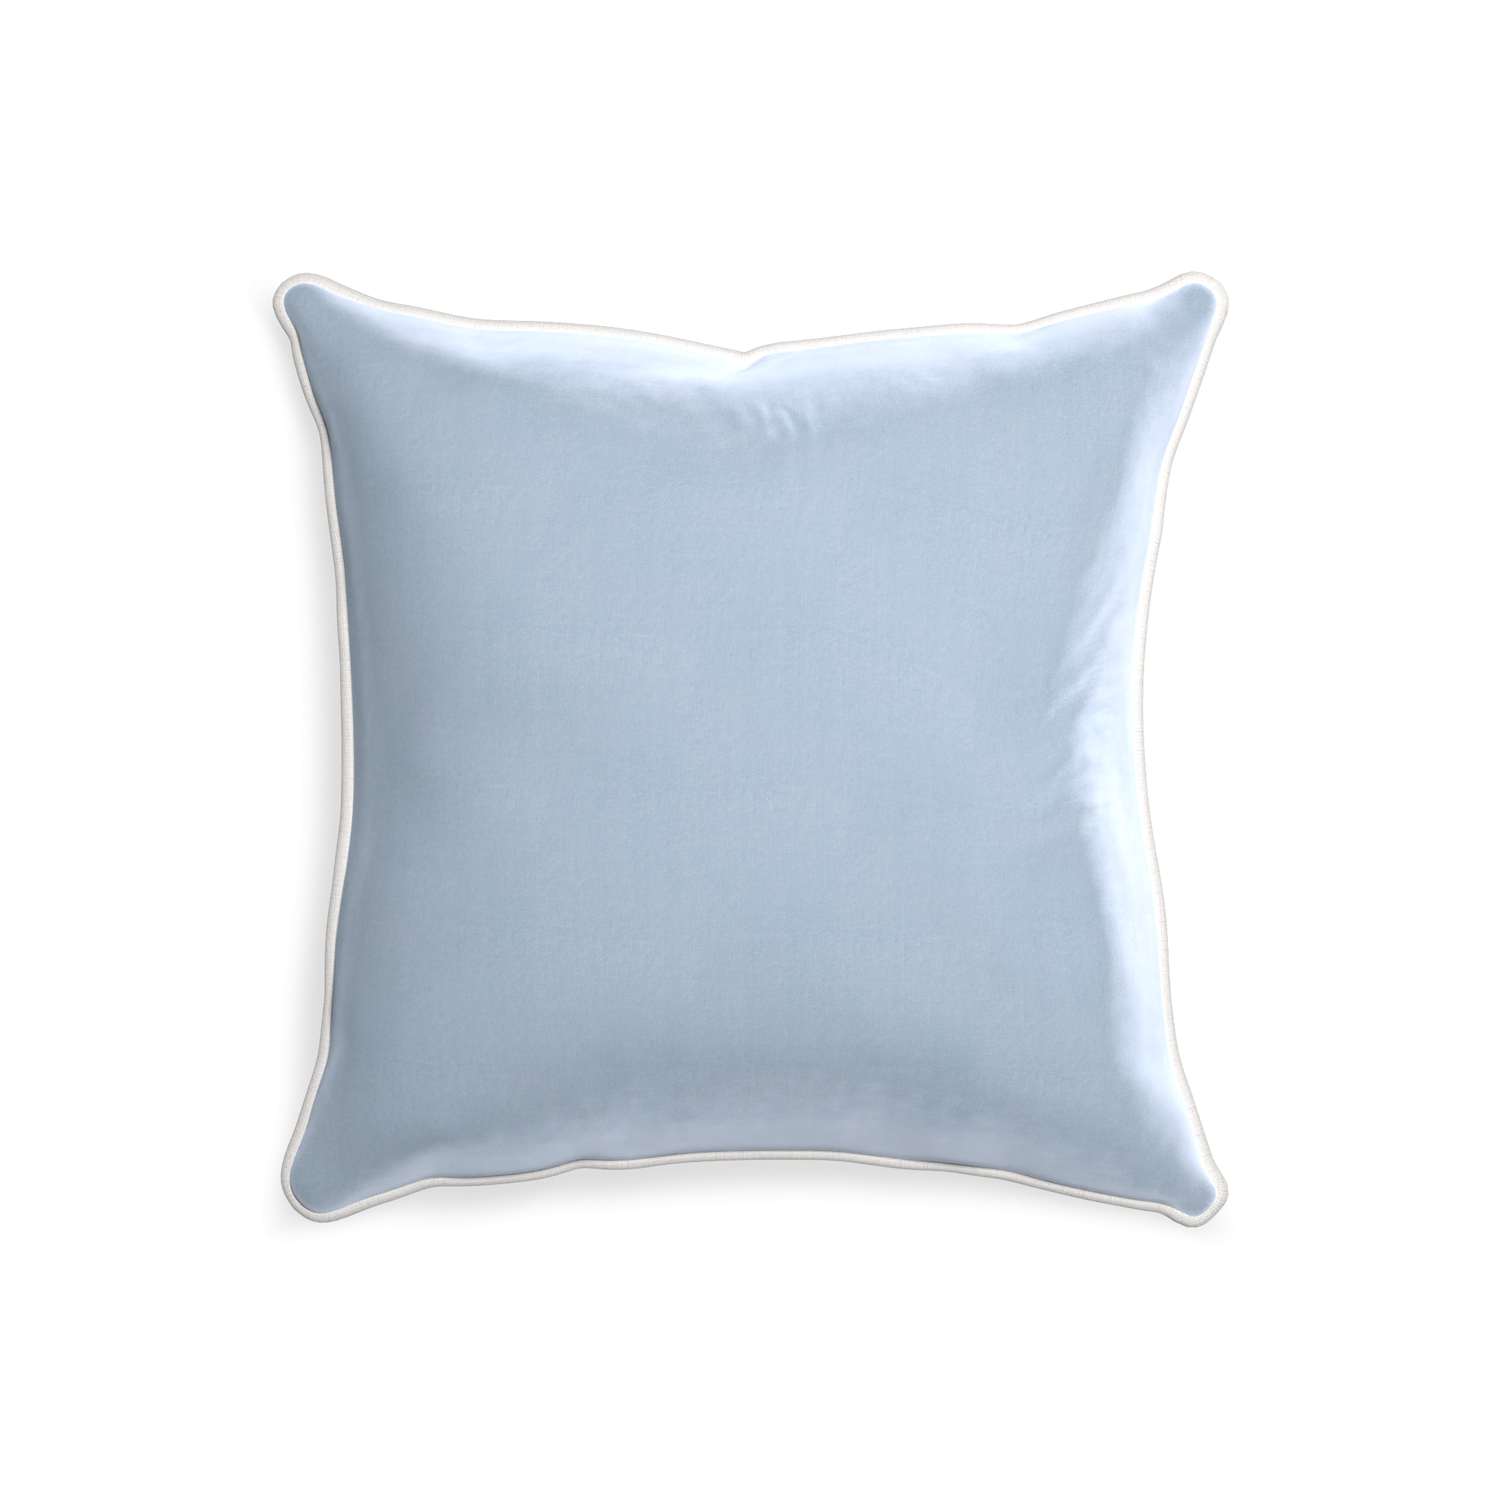 20-square sky velvet custom pillow with snow piping on white background